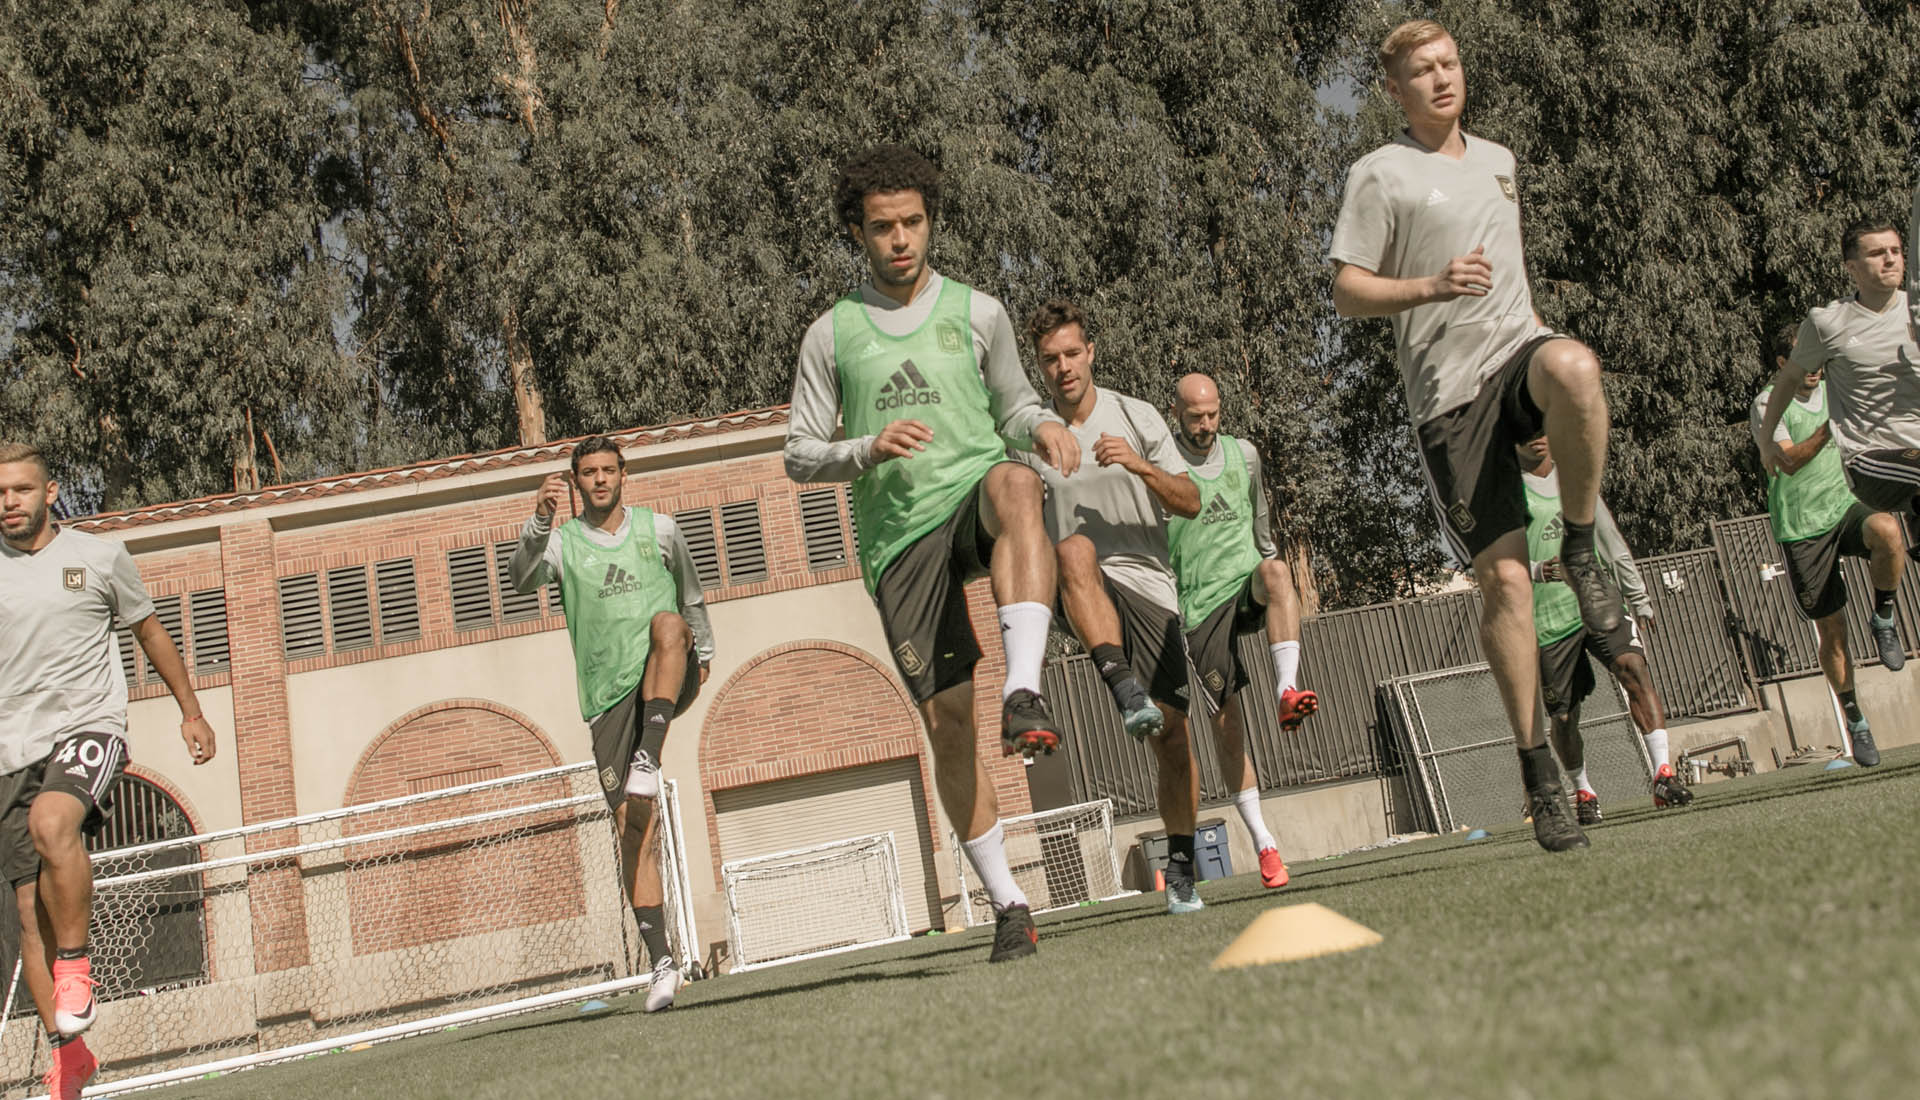 LAFC seeks to create and improve community through soccer – Daily Breeze